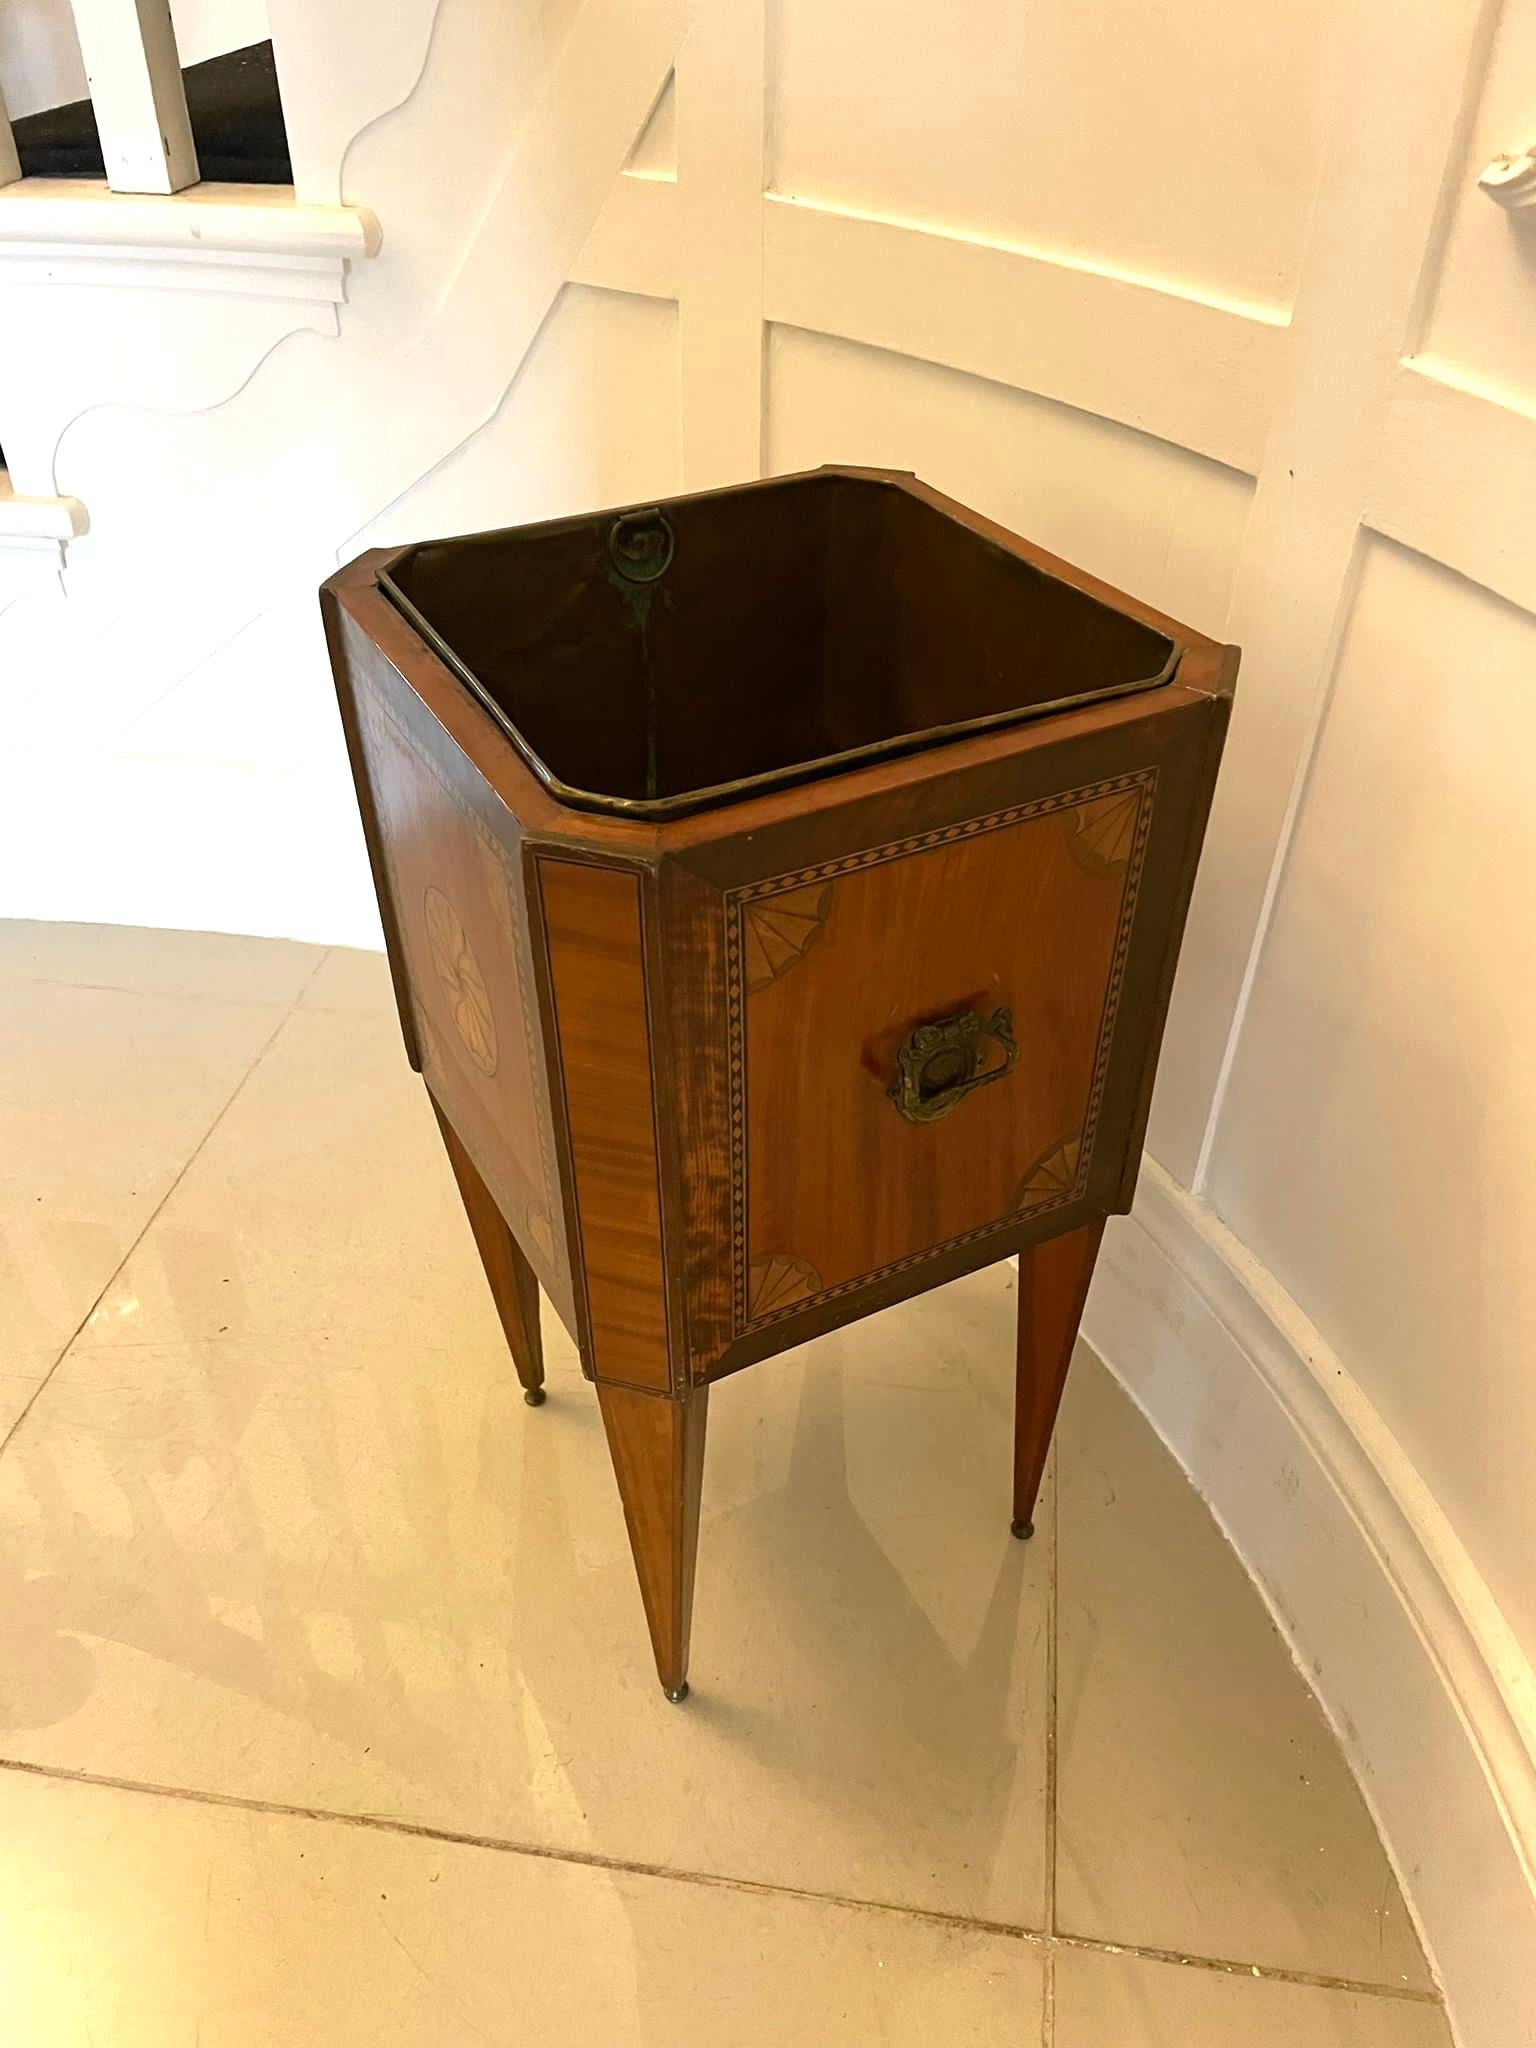 Antique George III quality satinwood inlaid freestanding champagne/wine cooler having a quality satinwood inlaid freestanding champagne cooler with pretty satinwood inlaid shells, original ornate brass carrying handles and brass liner standing on